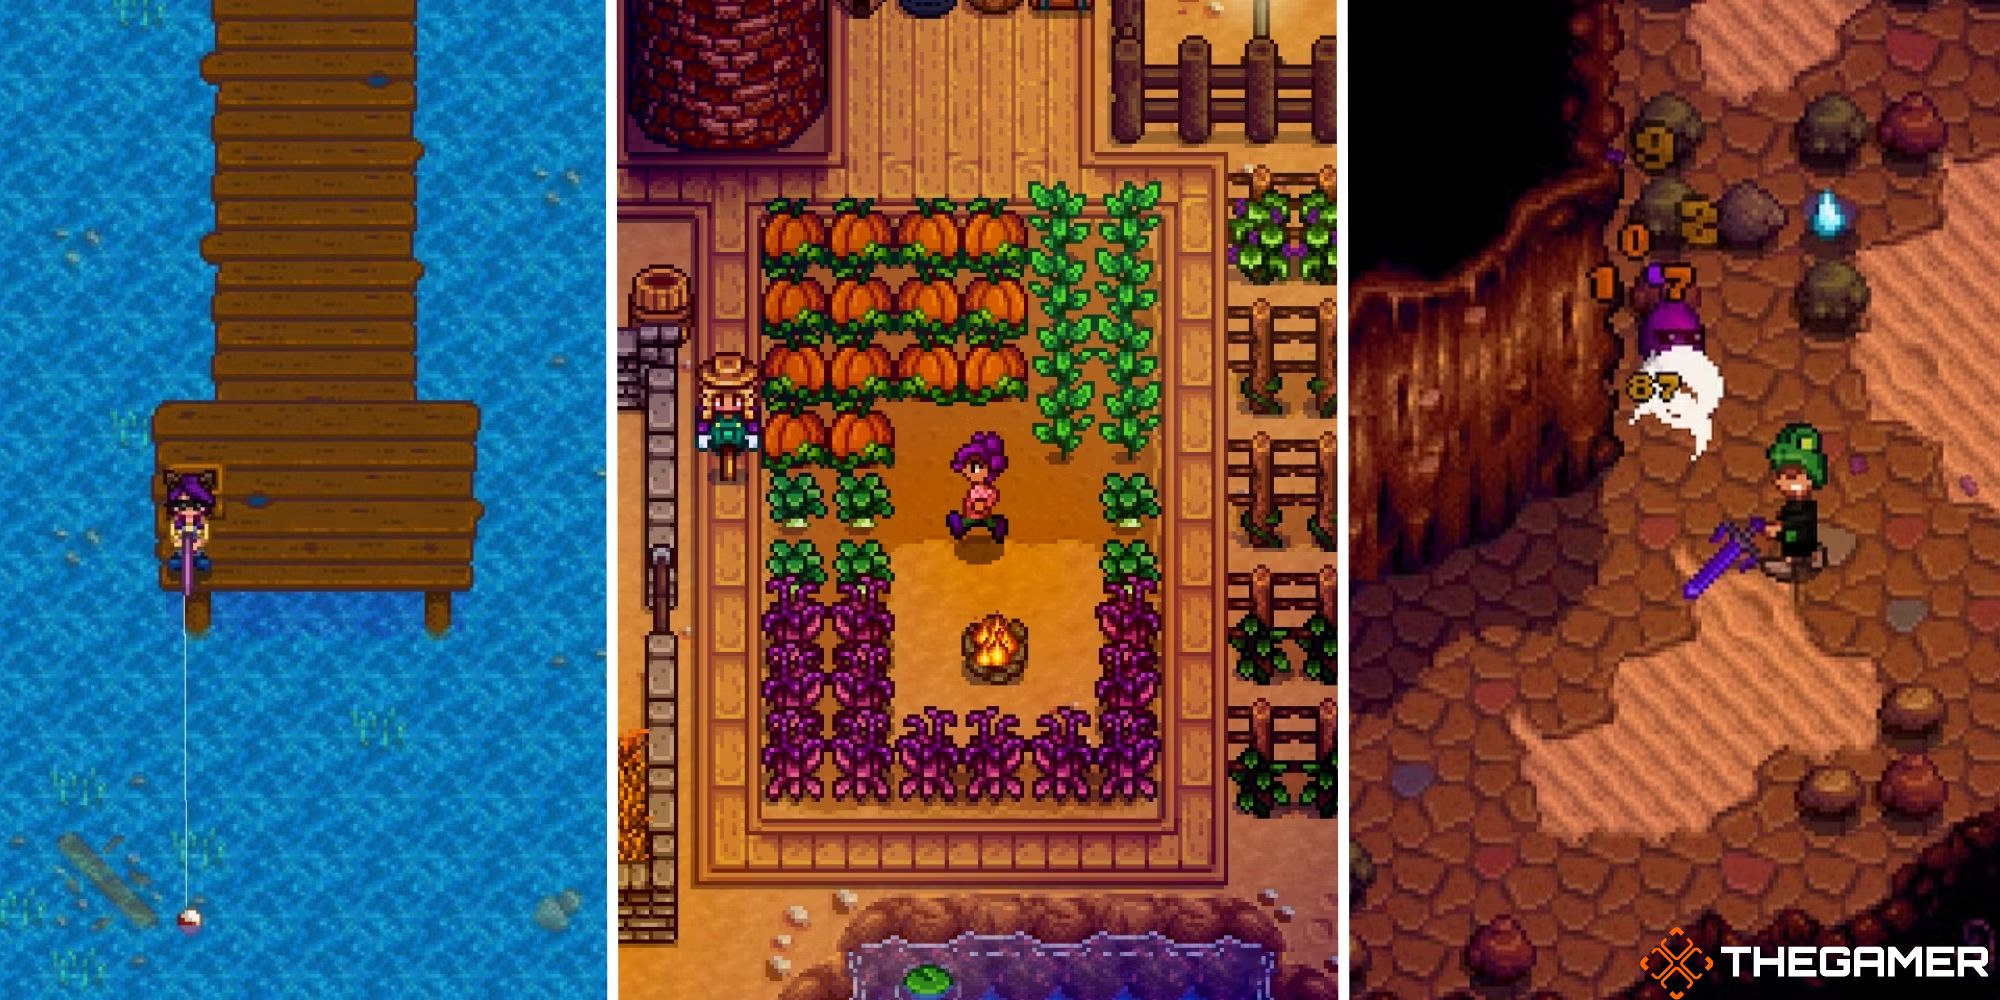 stardew valley split image showing fishing, farming, and combat